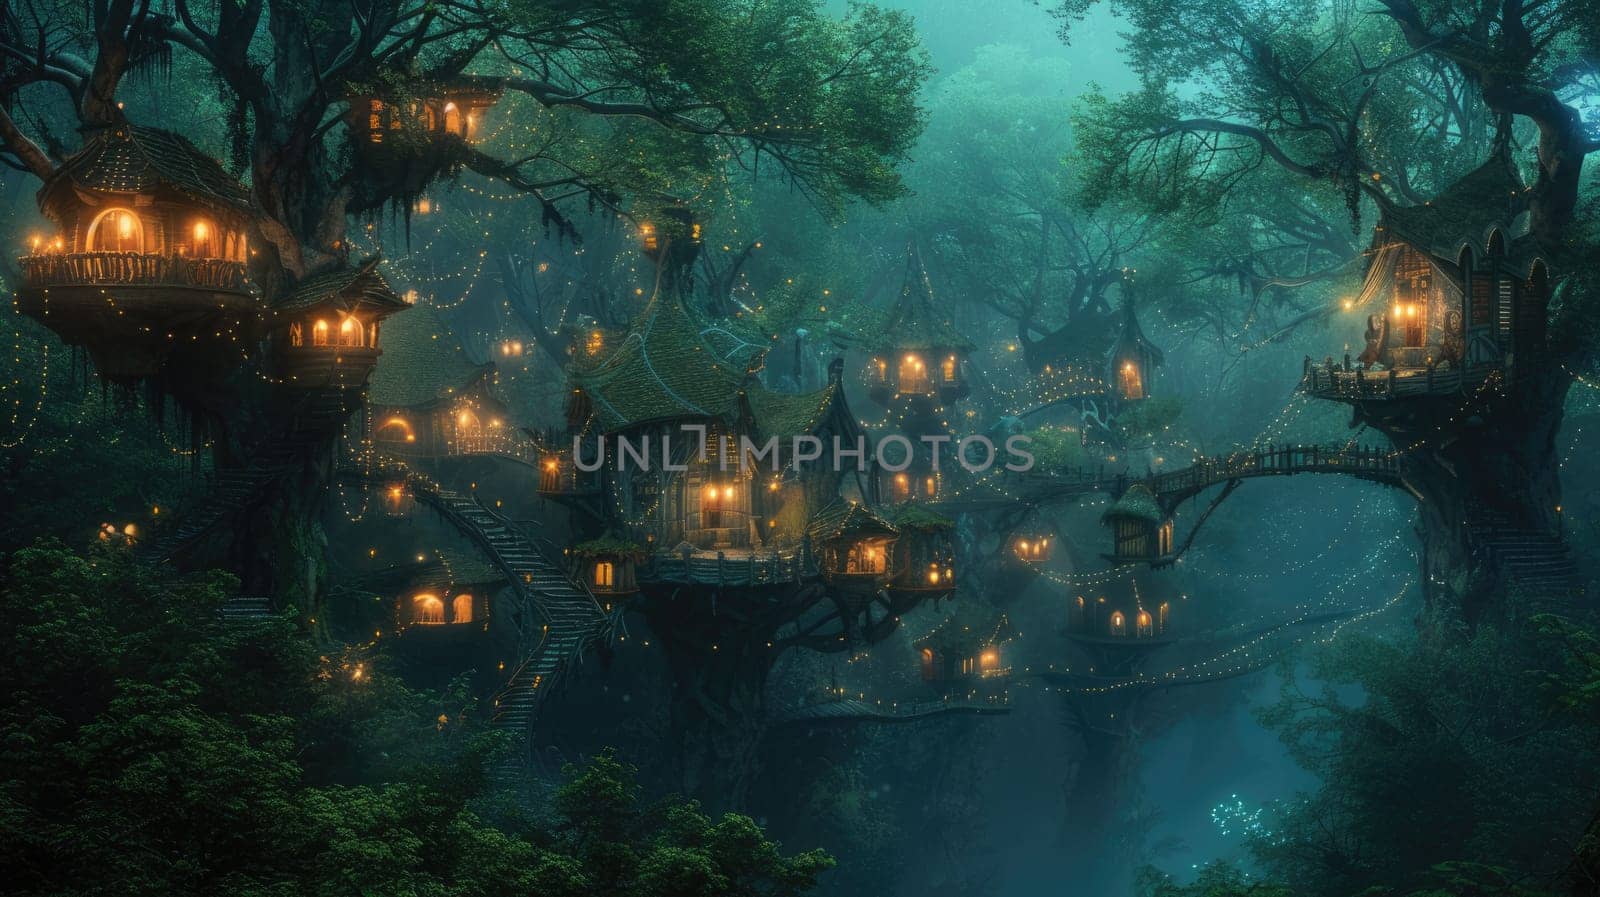 A fantasy scene of a hidden elven city in an ancient forest. Resplendent. by biancoblue